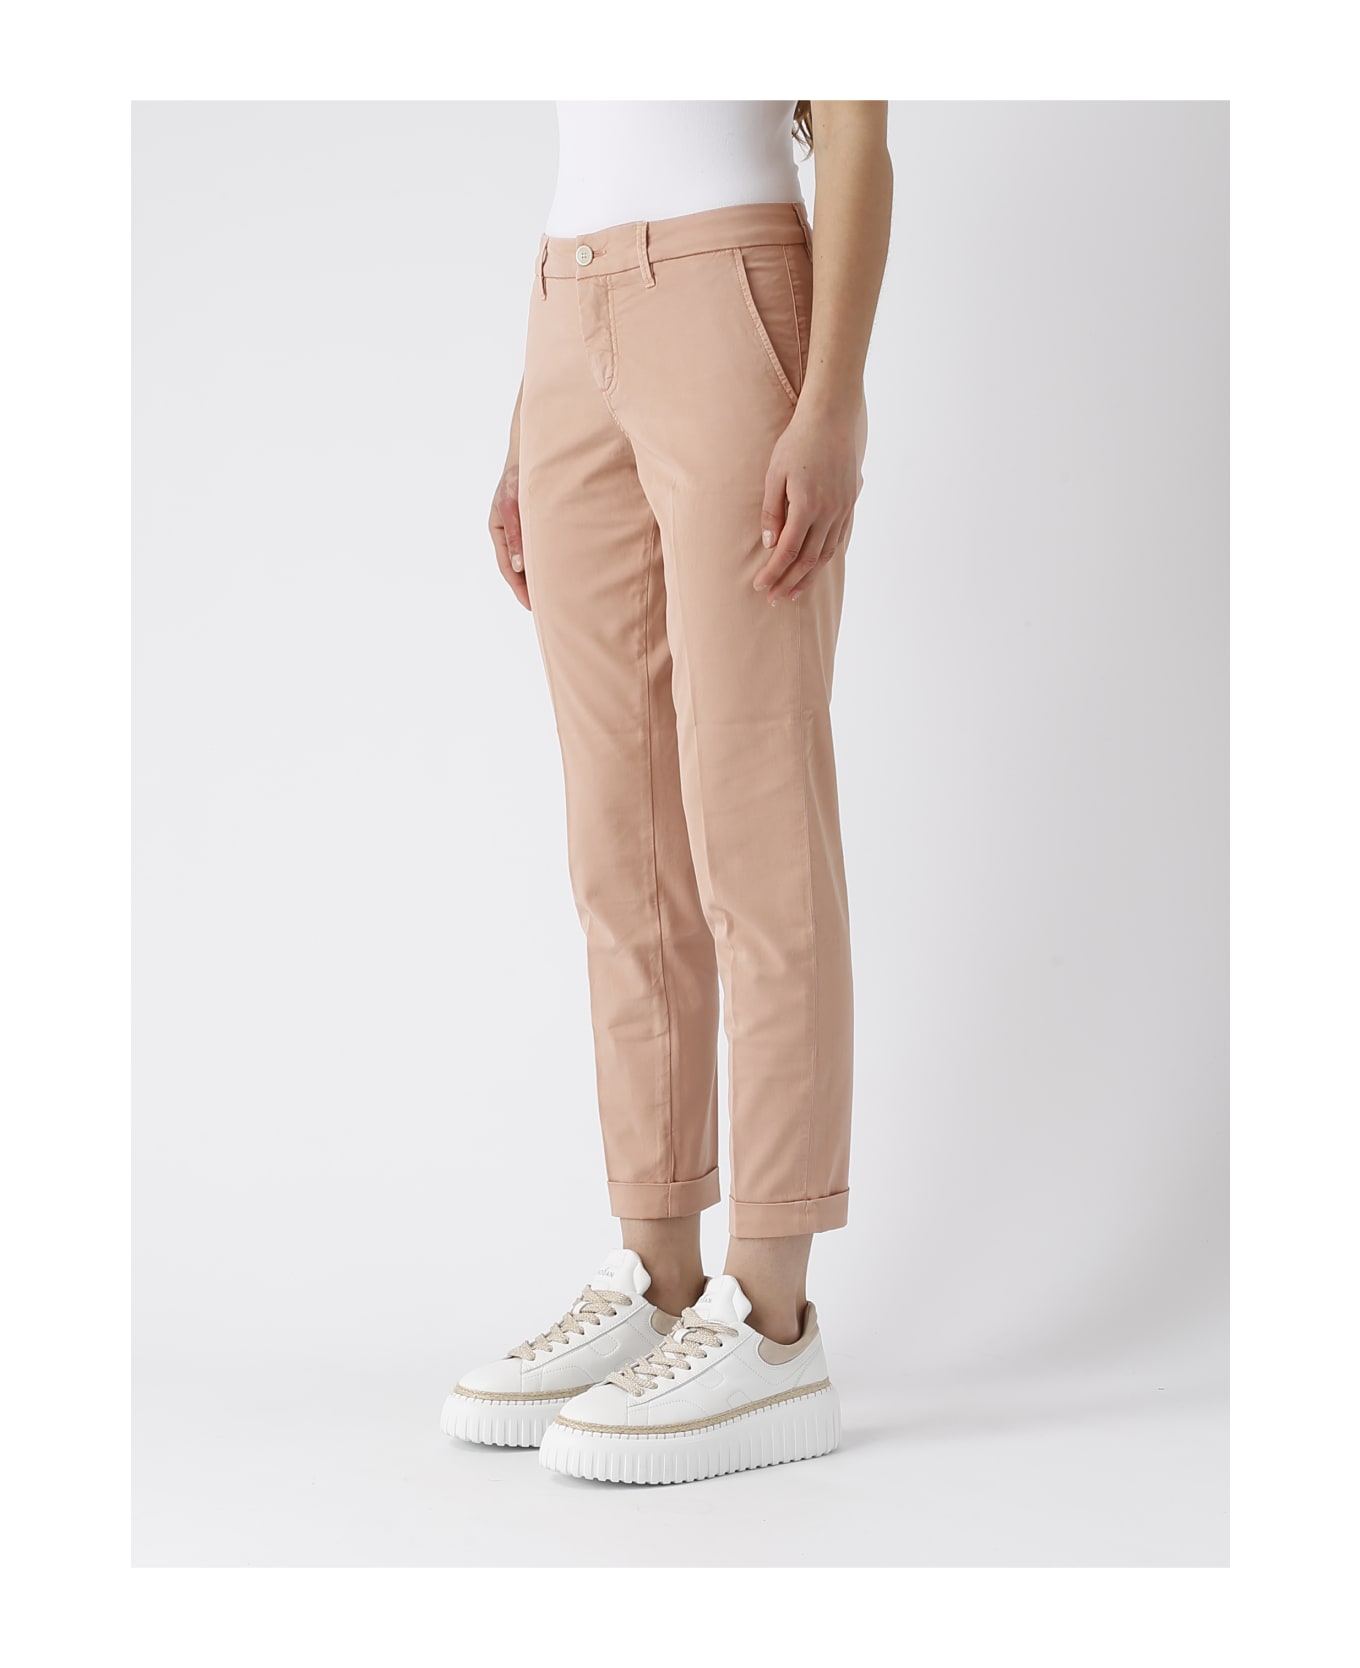 Fay Pant. Chinos F.do 17 Trousers - SALMONE ボトムス